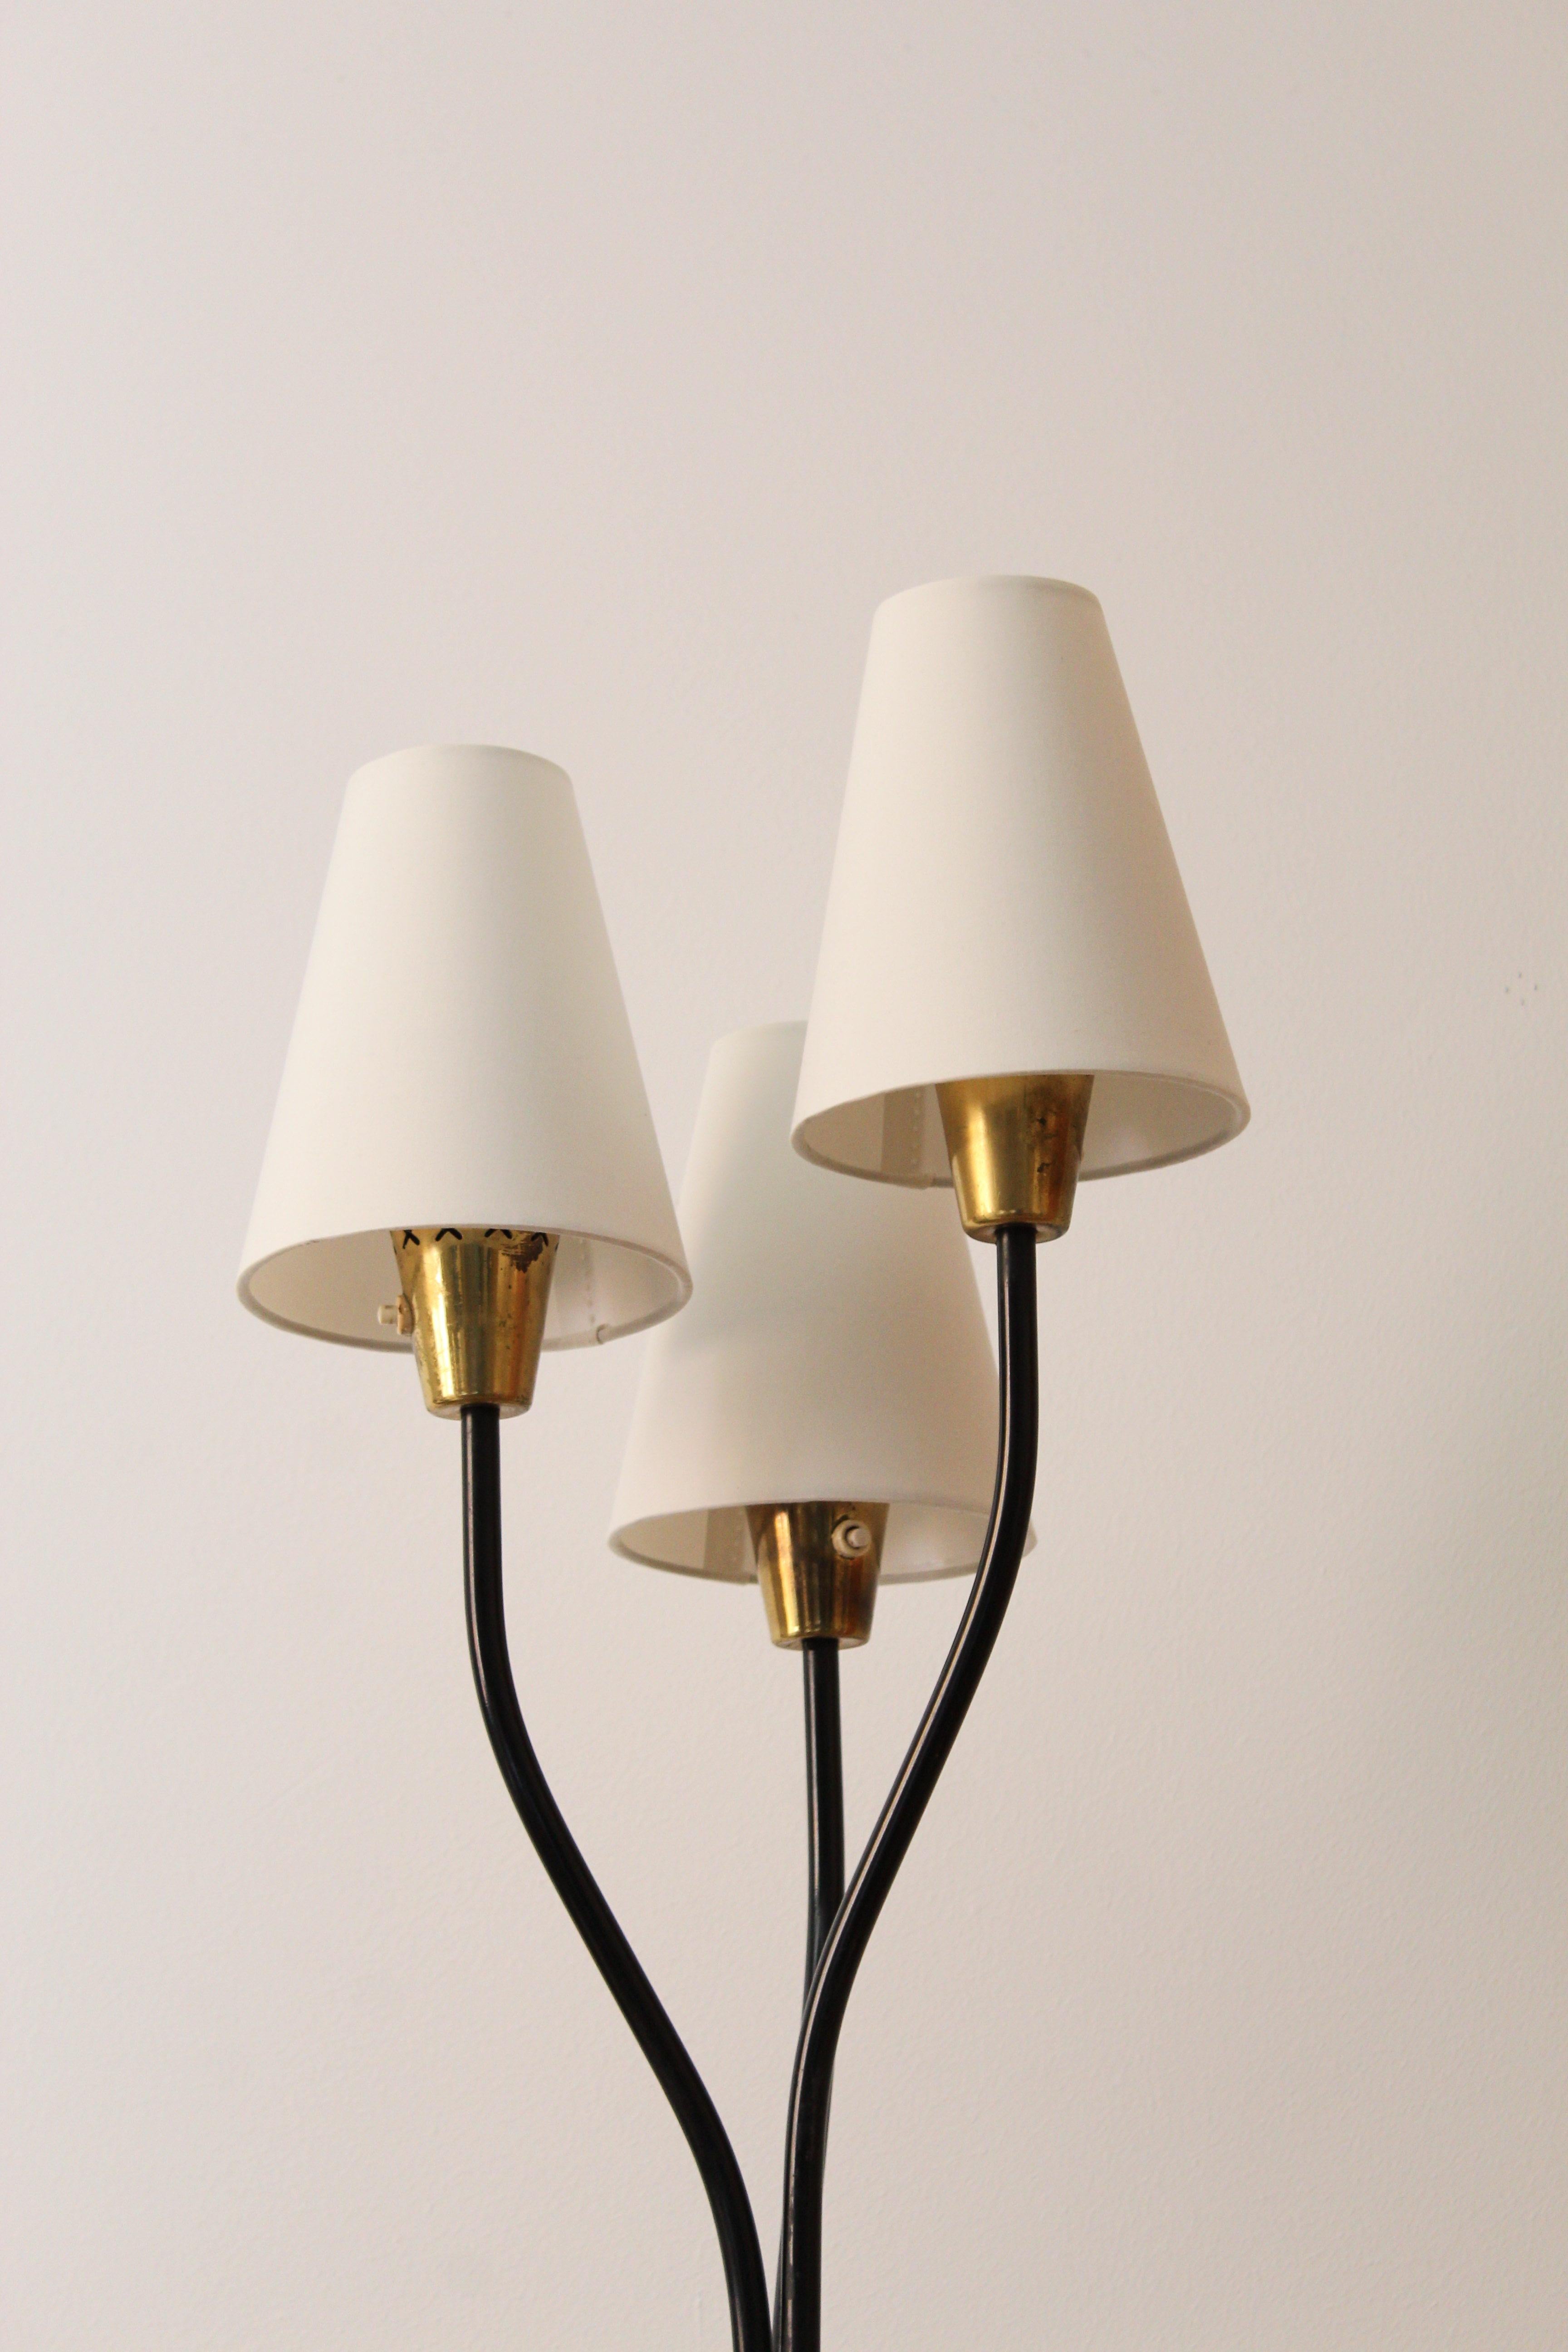 An organic 3-armed floor lamp. Produced and designed in Sweden, 1950s. 

Other designers working in the organic style include Jean Royere, Gio Ponti, Vladimir Kagan, Ico Parisi, and George Nakashima.